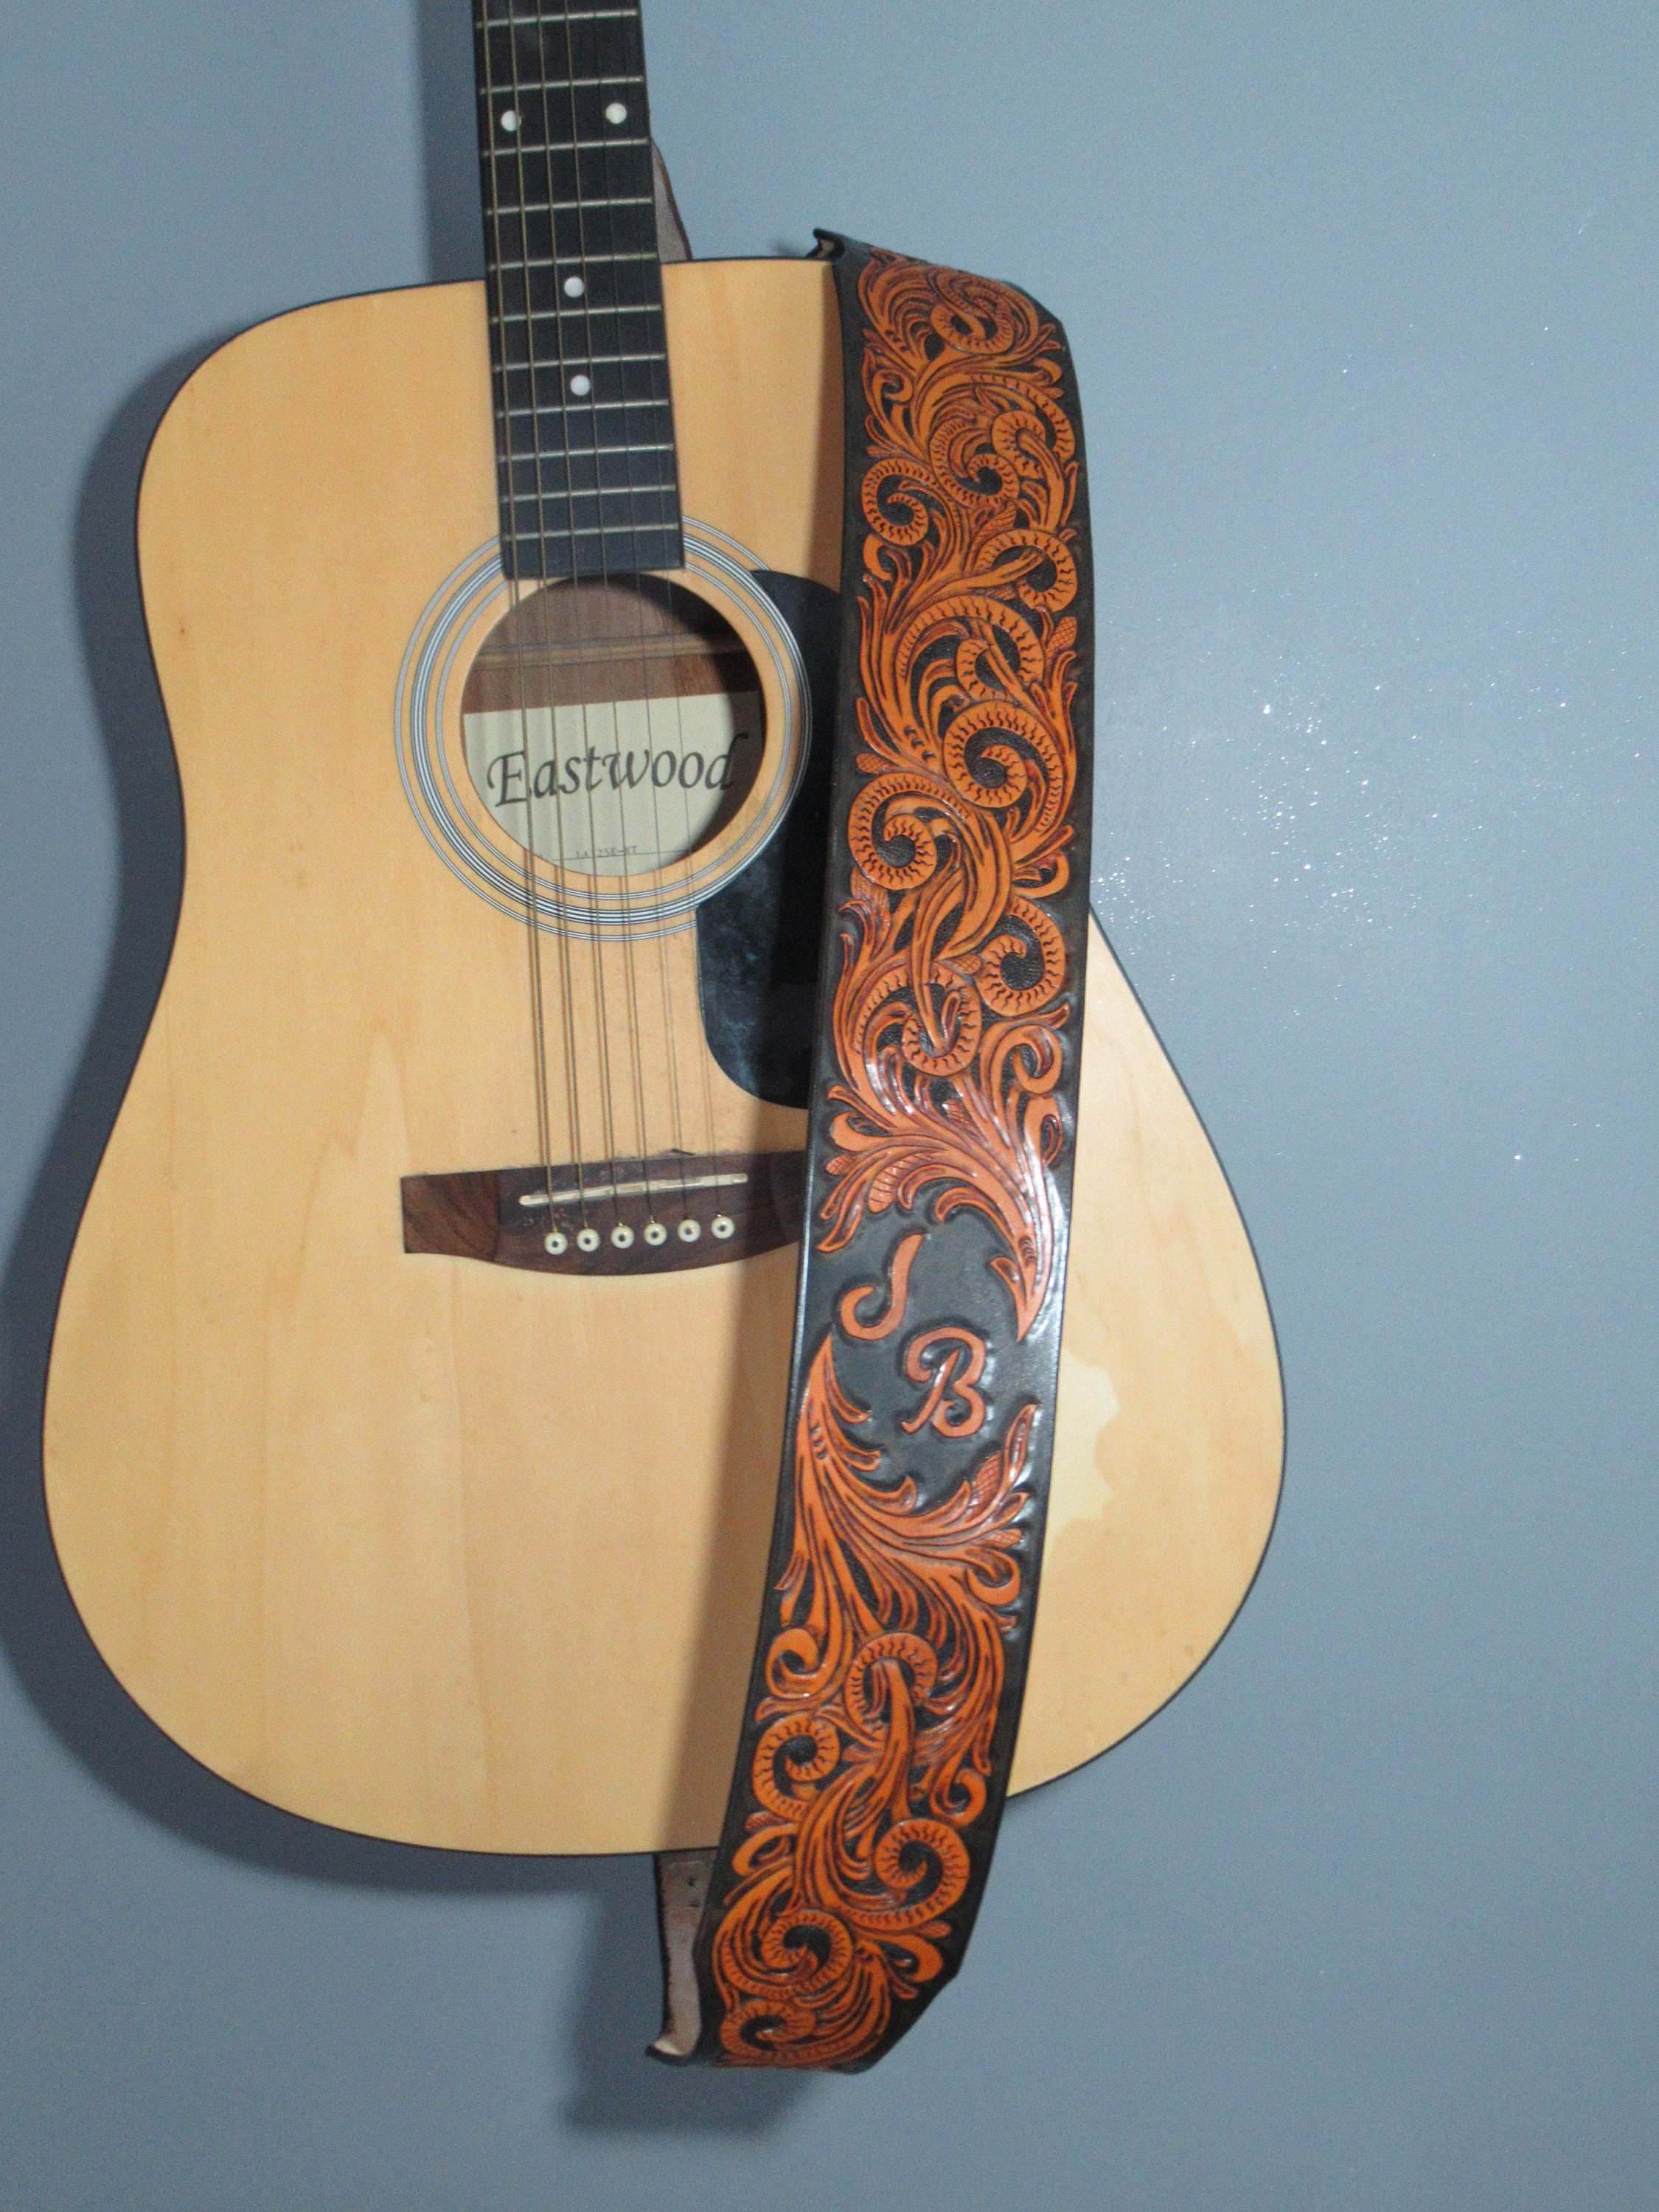 Custom Leather Chain Link Guitar Strap Back Alley Brawler Tooled Opt Heavy  Metal